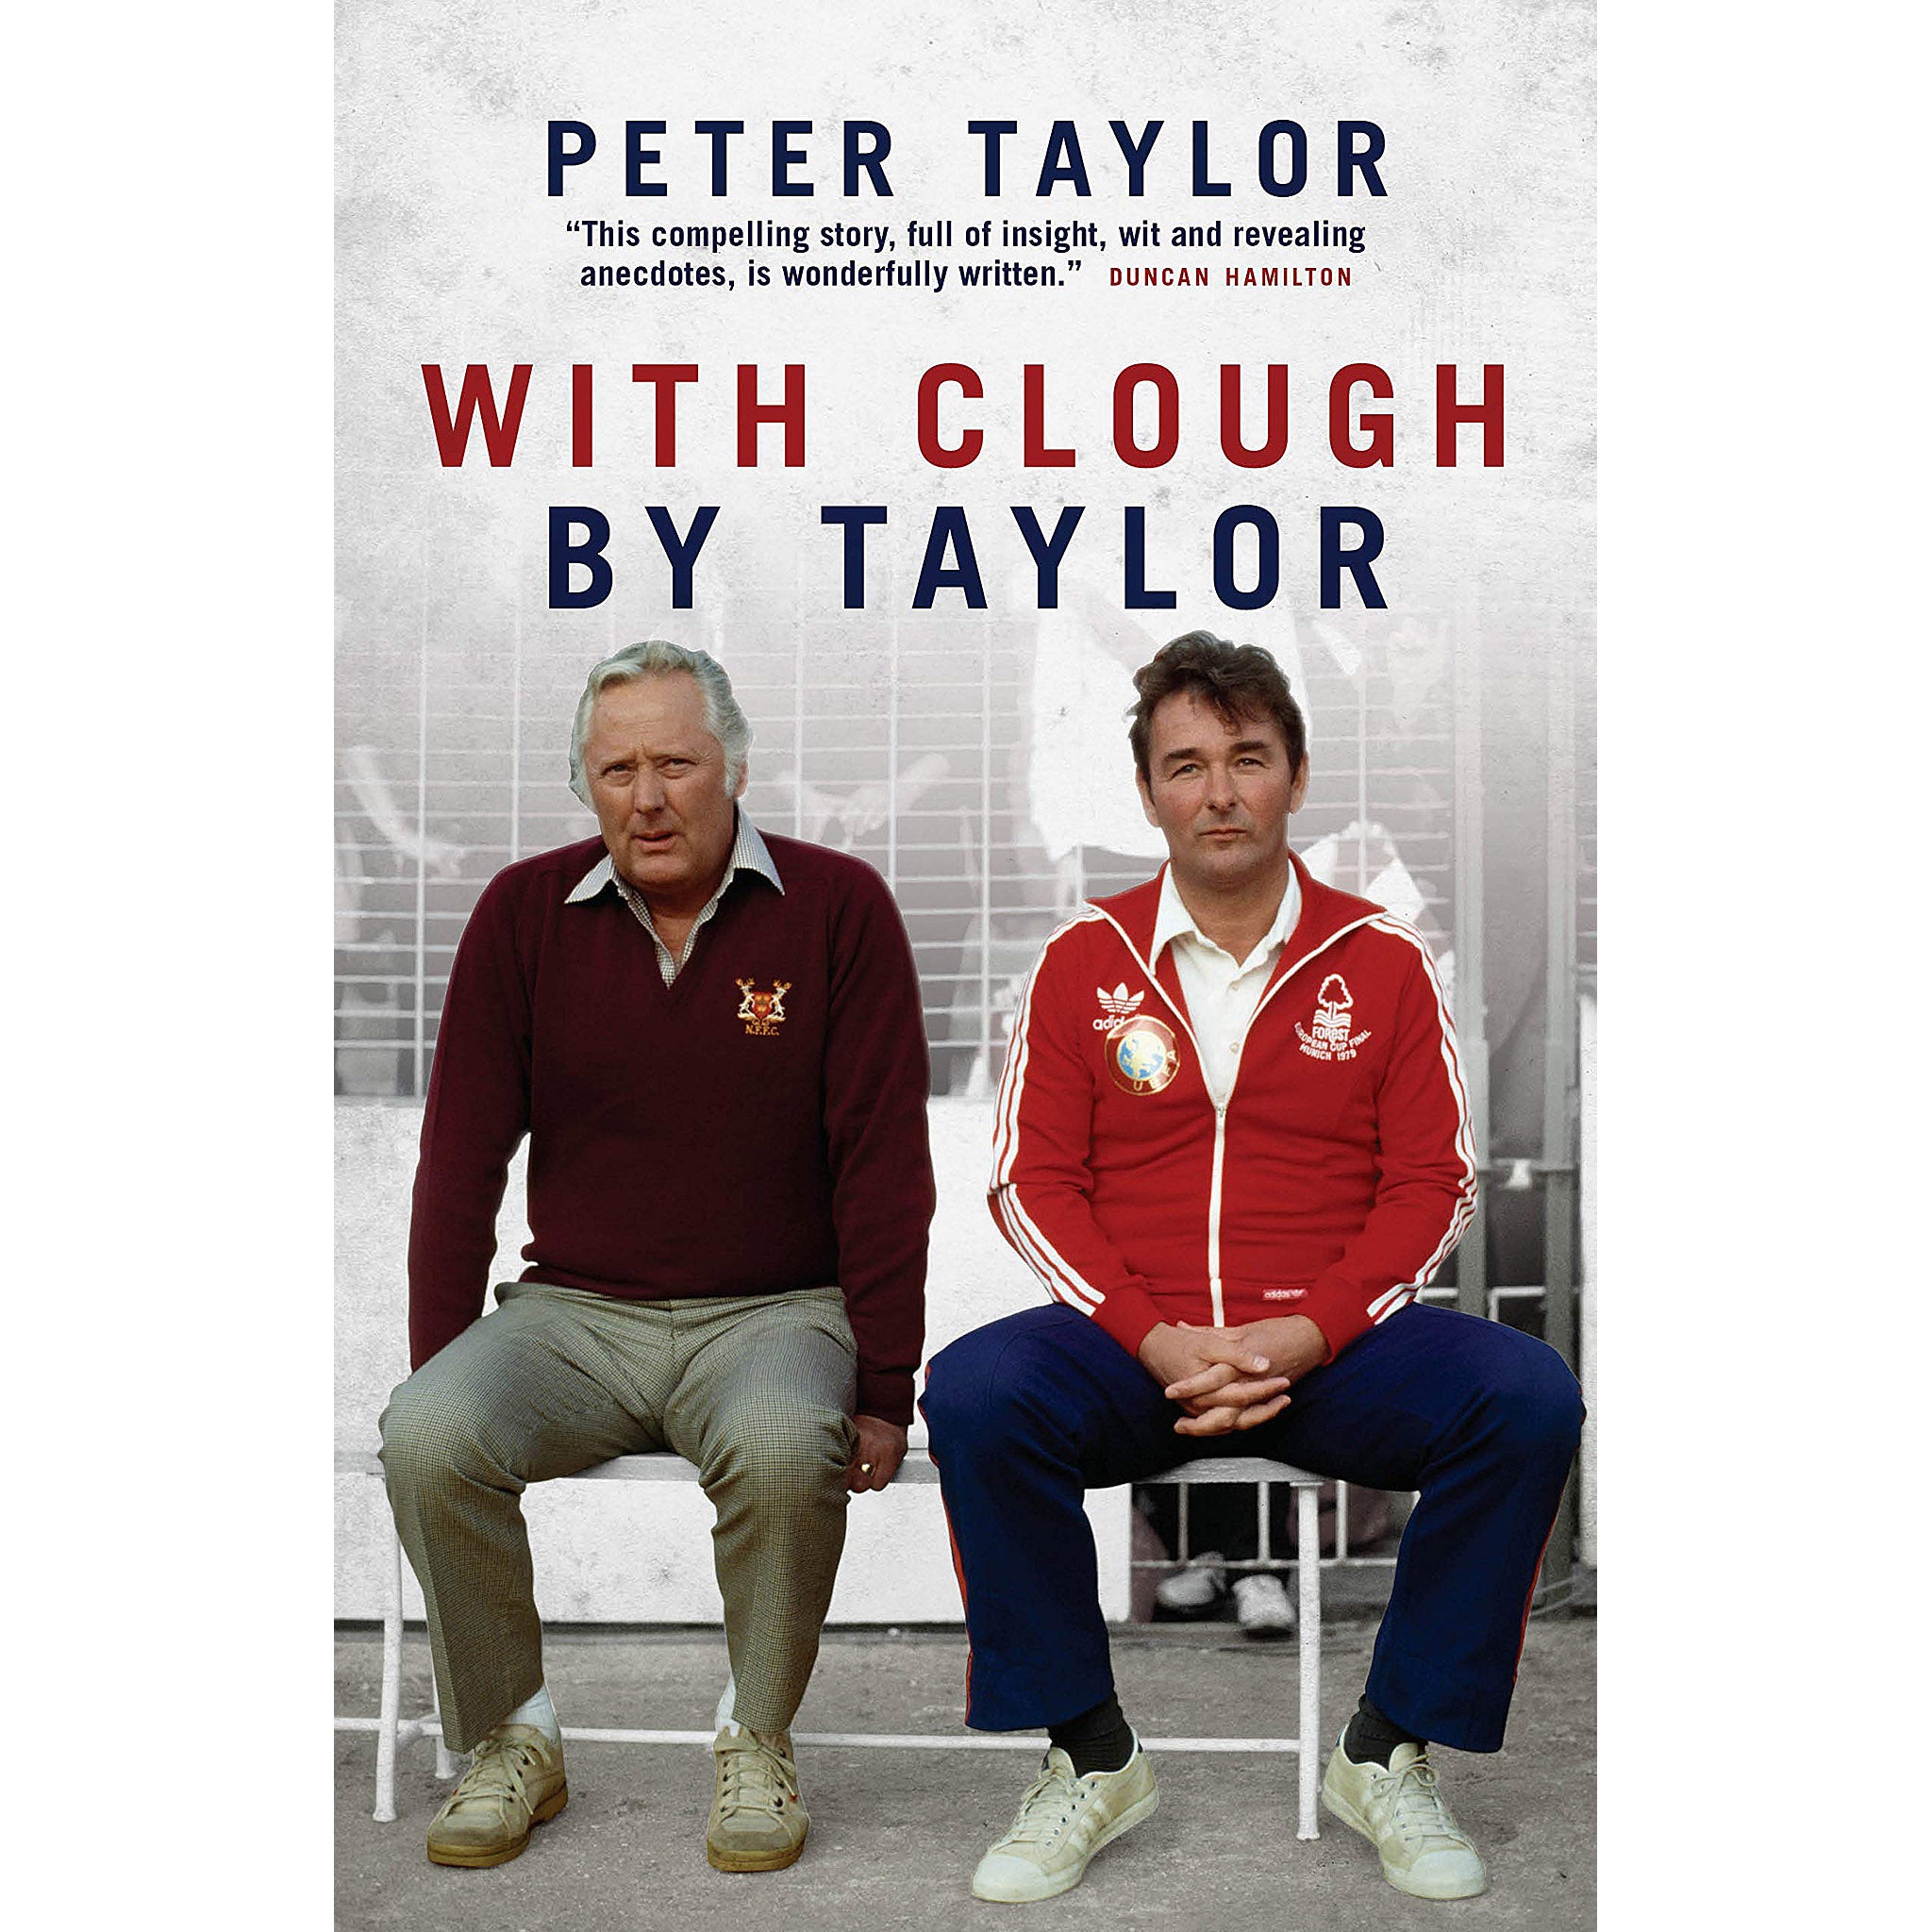 With Clough by Taylor – Peter Taylor and Brian Clough